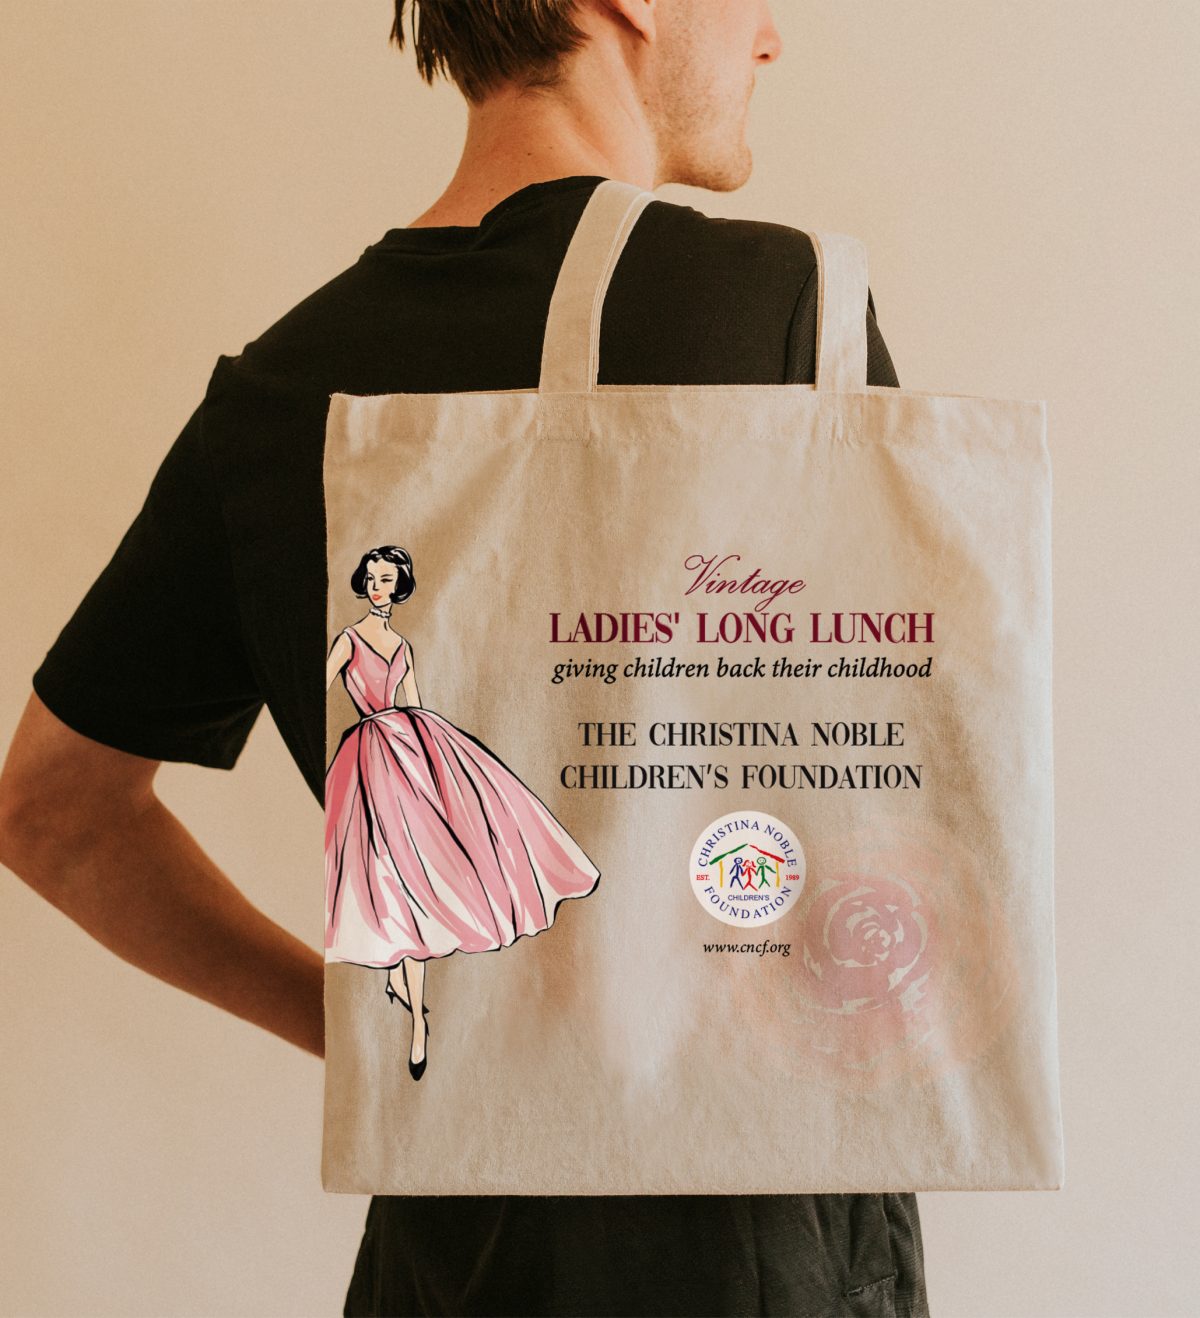 Person holding a canvas tote bag with a vintage ladies' lunch design.